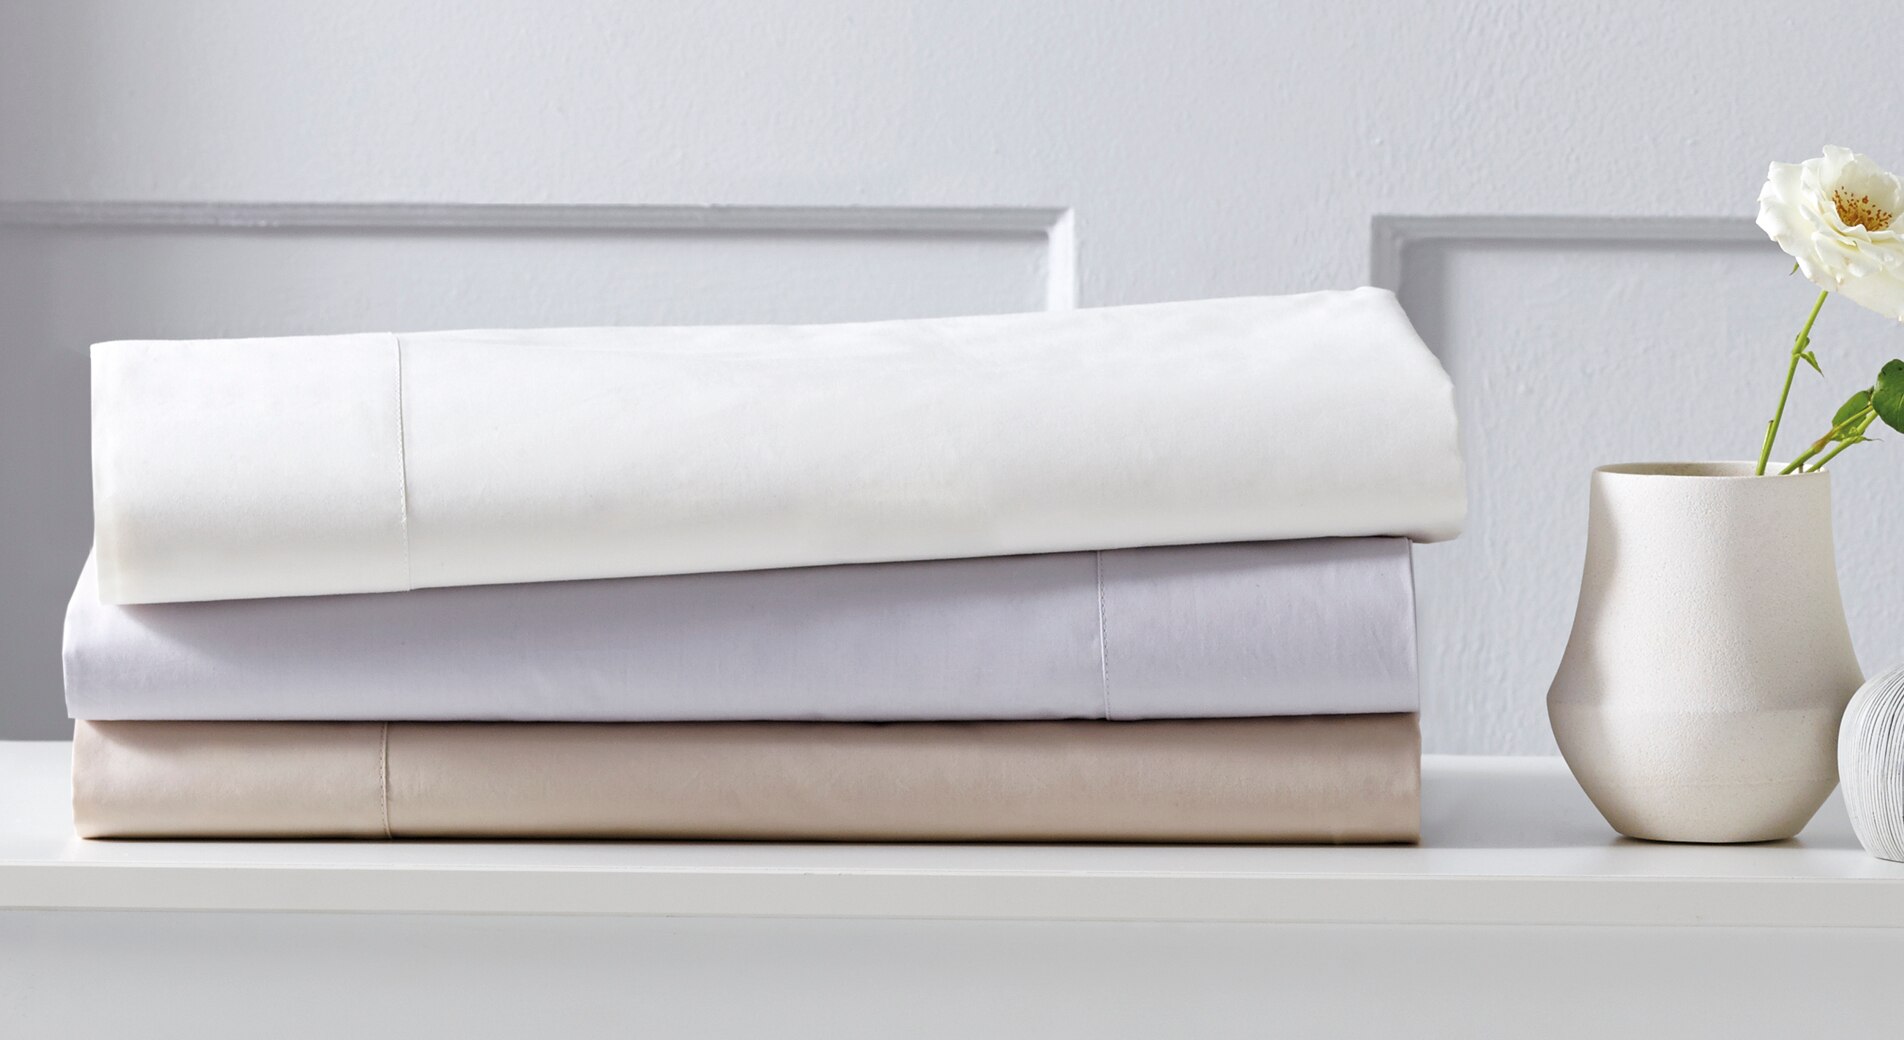 a luxurious set of sheets